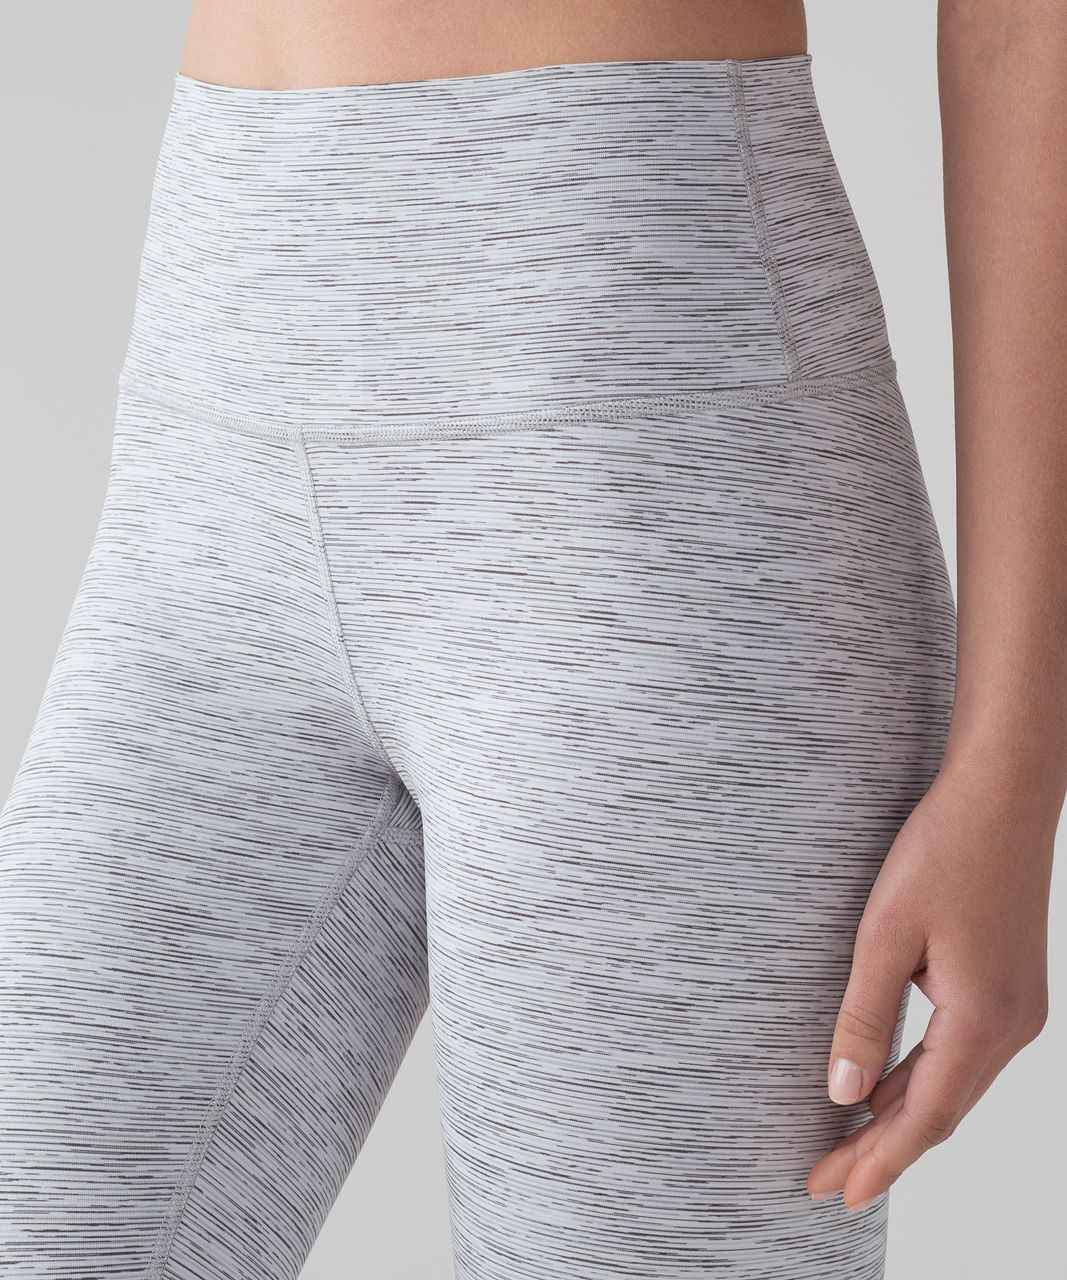 Lululemon Wunder Under Hi-Rise 1/2 Tight (Luxtreme) - Wee Are From Space Ice Grey Alpine White